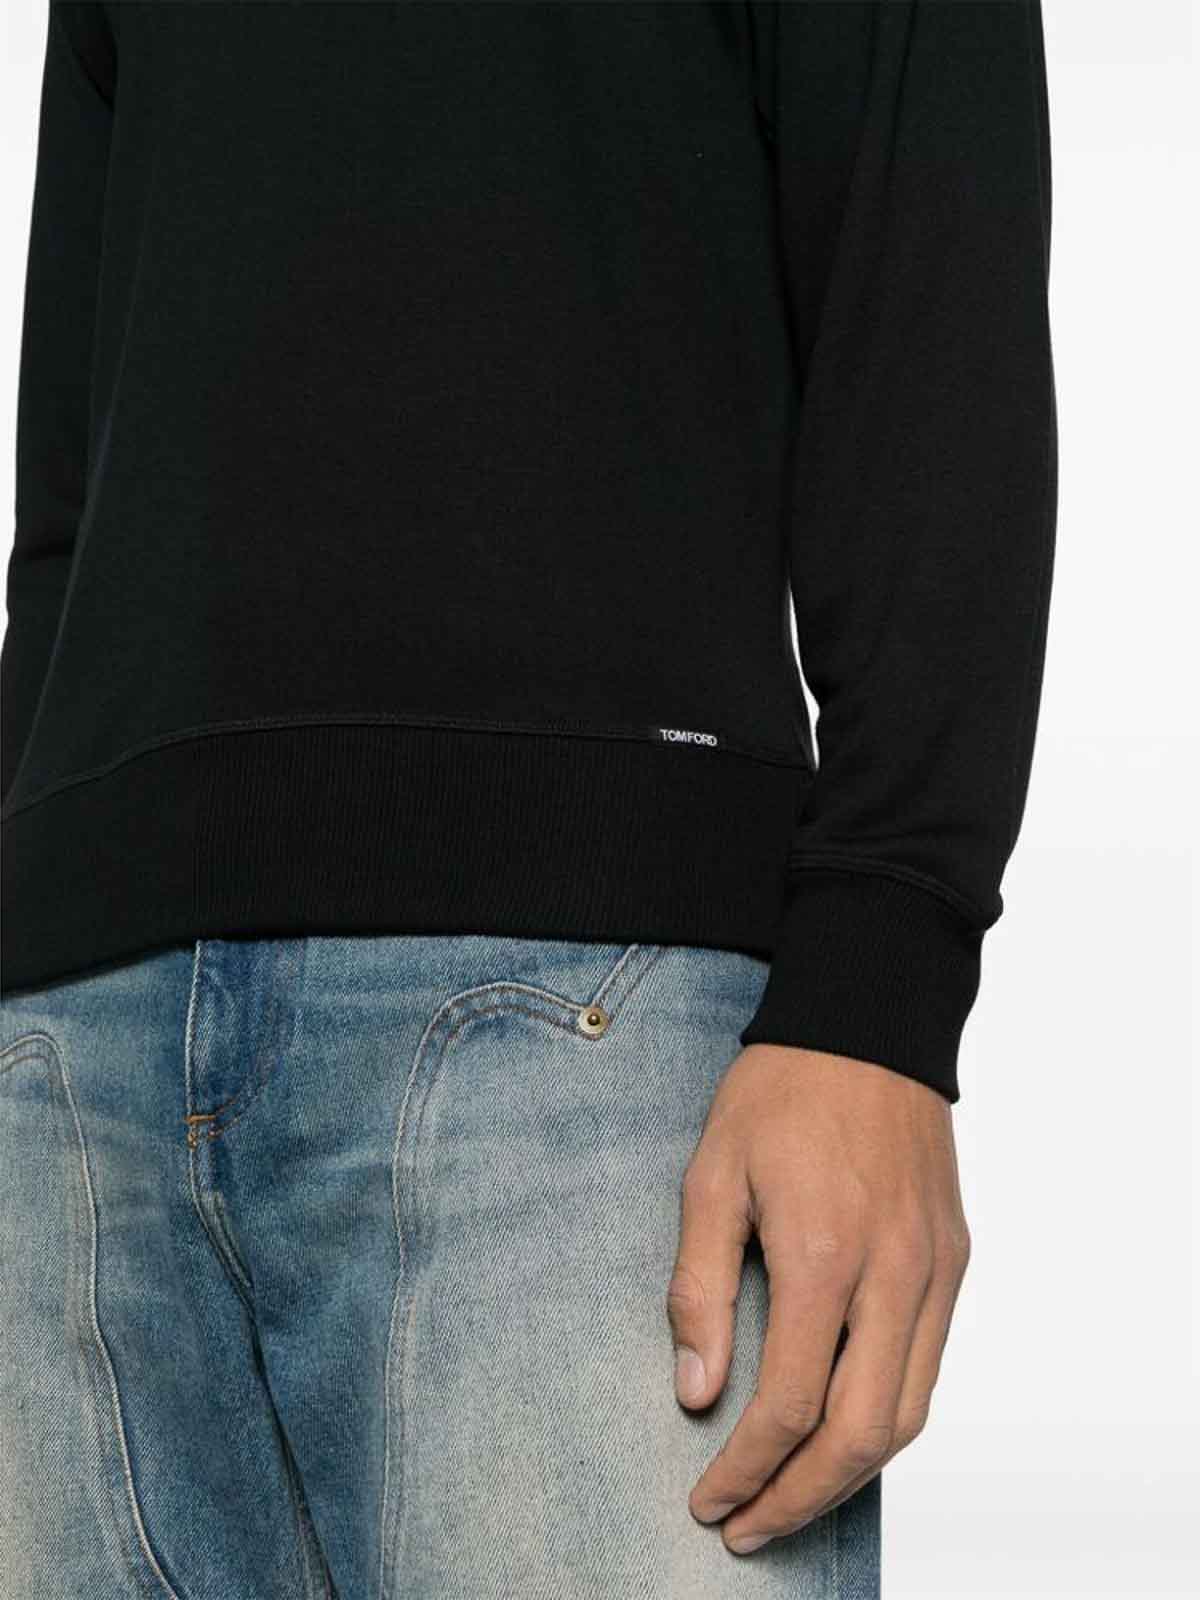 Shop Tom Ford Black Knit Crew Neck Sweater